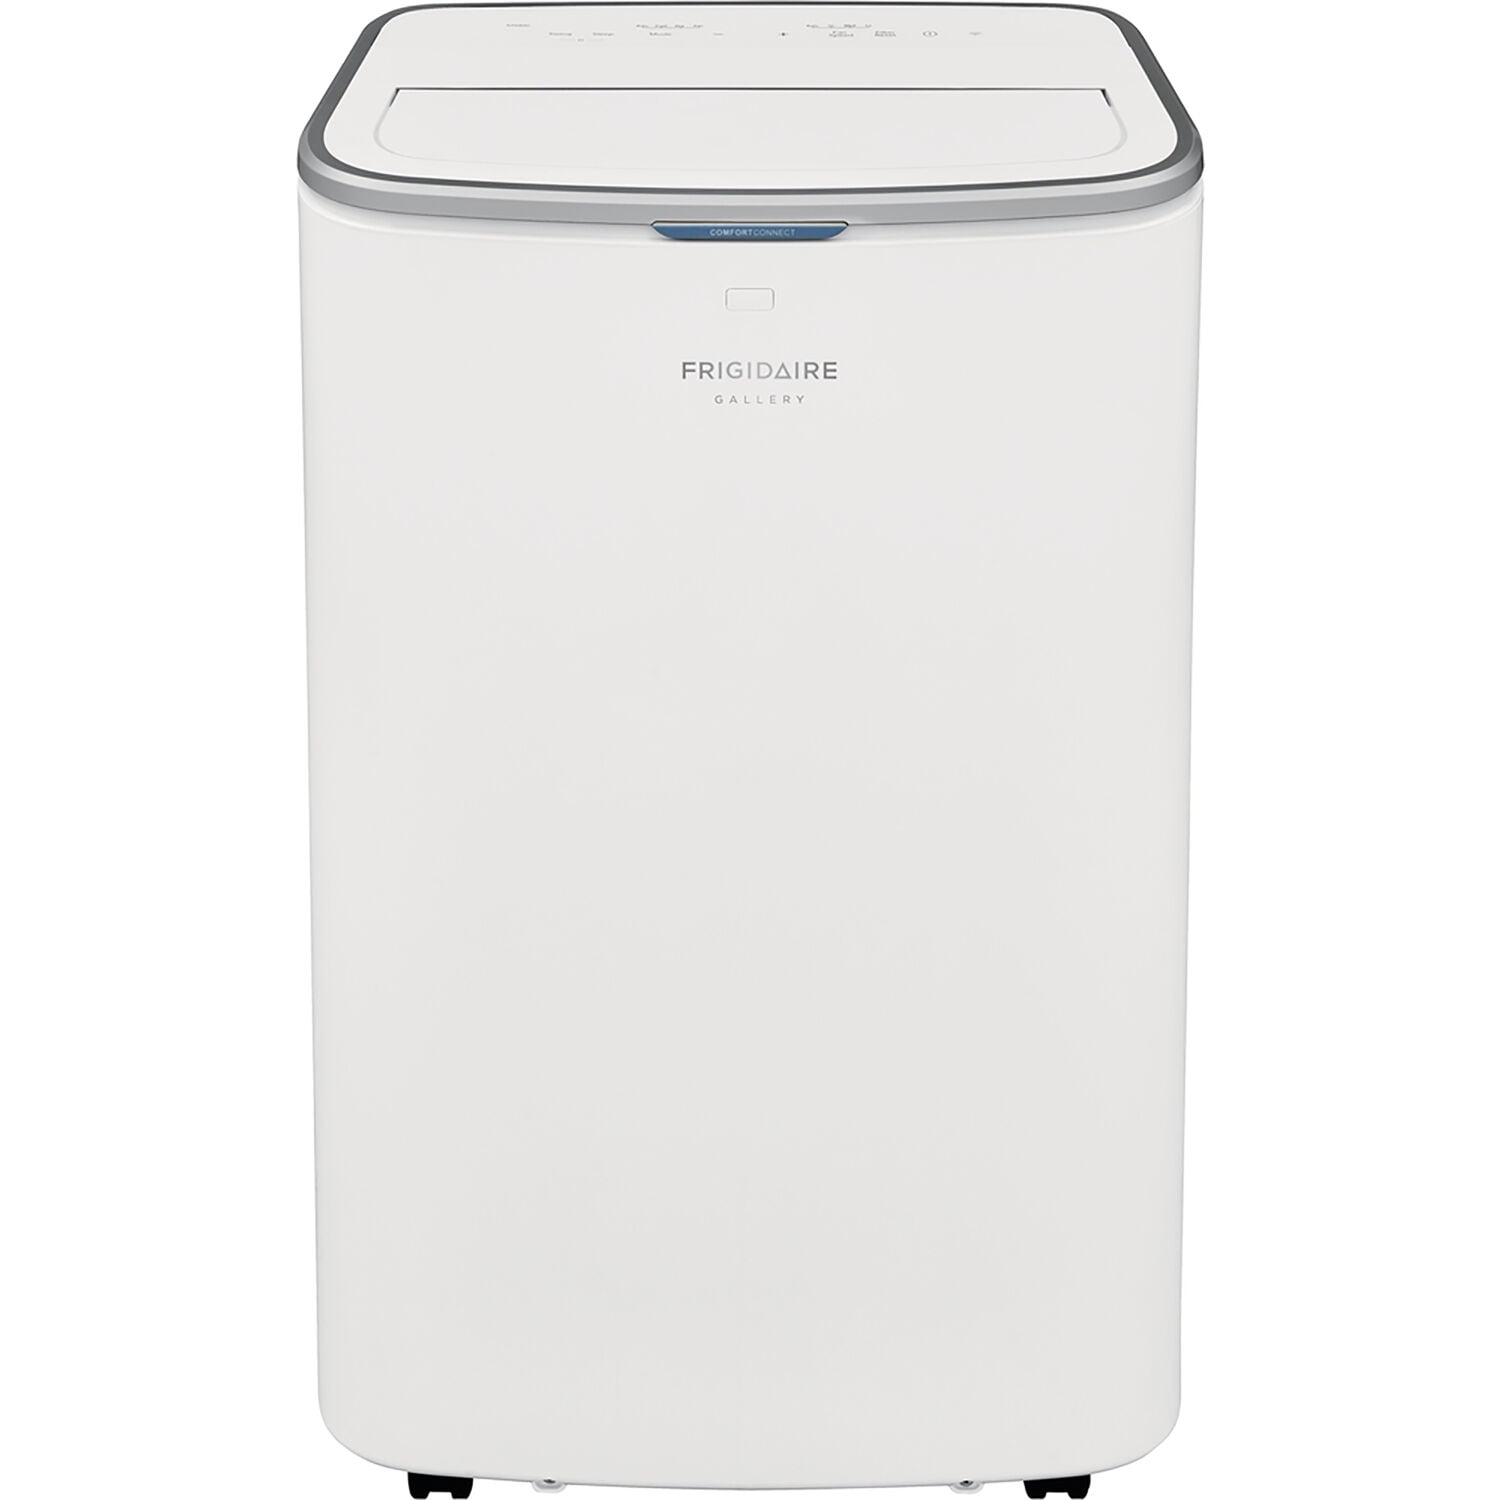 Home Vertical Mobile Dormitory Portable Cooler Small air Conditioner 2 Style Optional Fan Color : B LSX Portable air Conditioner 2h Appointment Timing 5L Full Suction Tank Powerful Cooling 